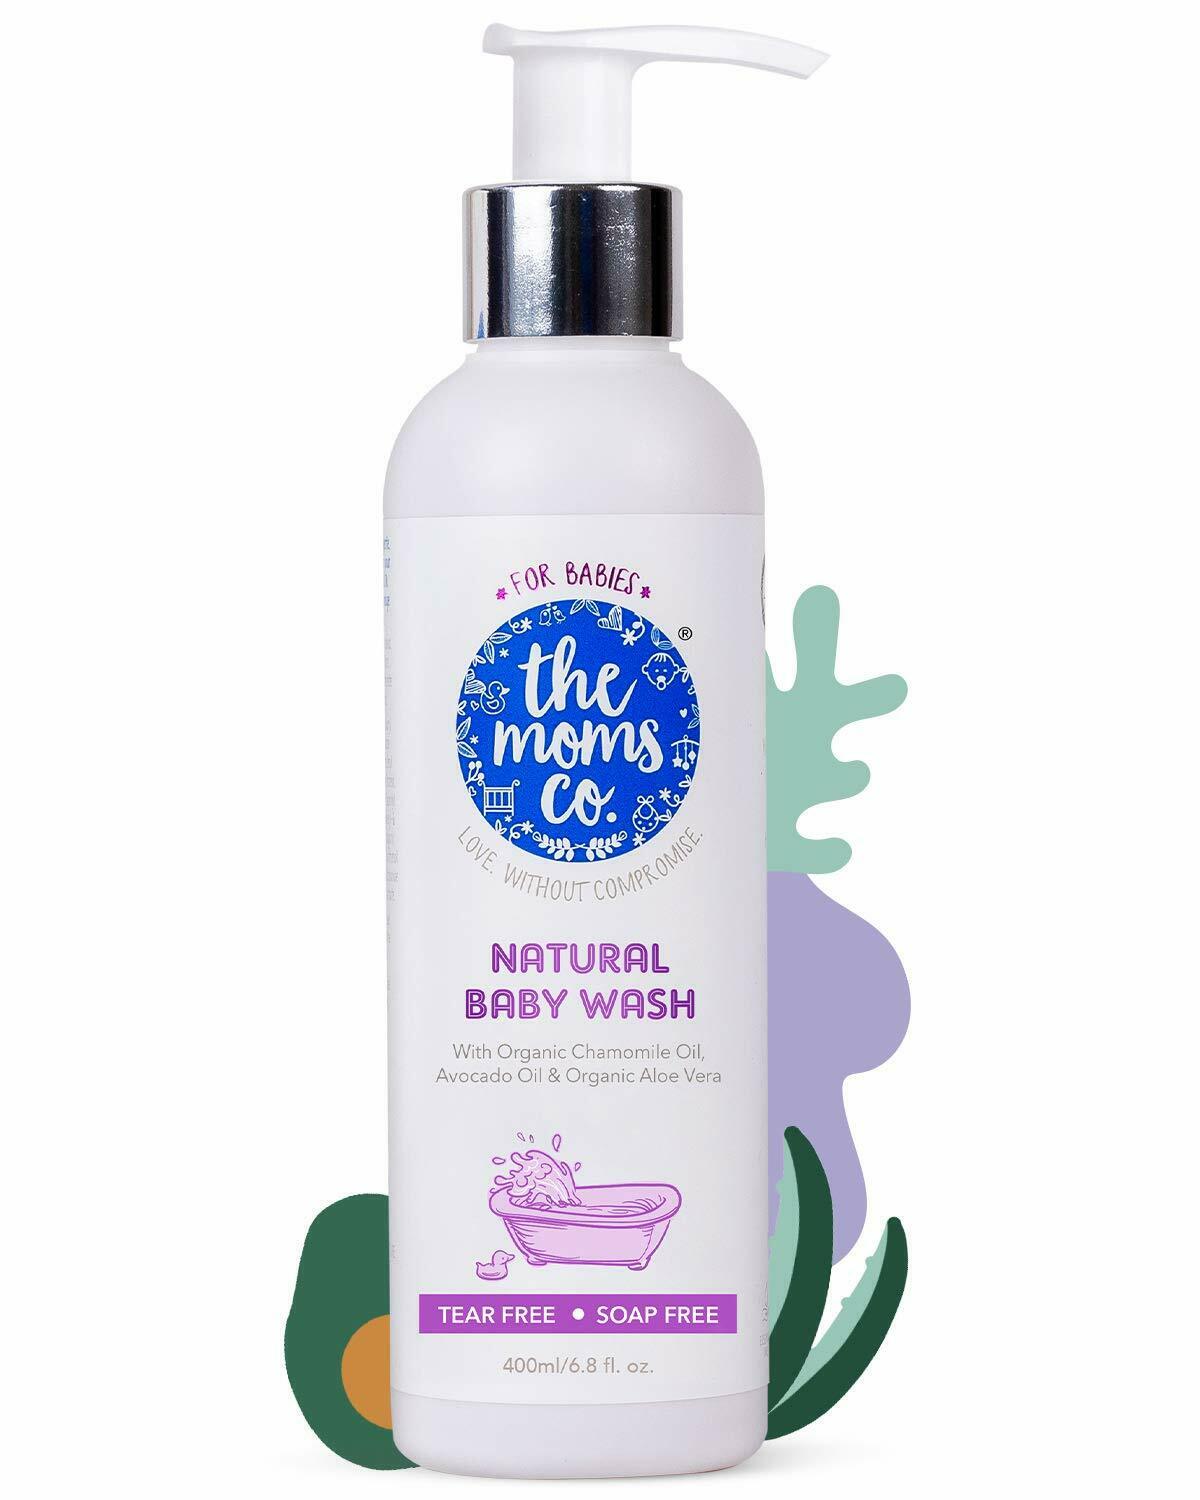 The Moms Co. Tear-free Natural Baby Wash With Calendula, Avocado Oil (400 Ml)